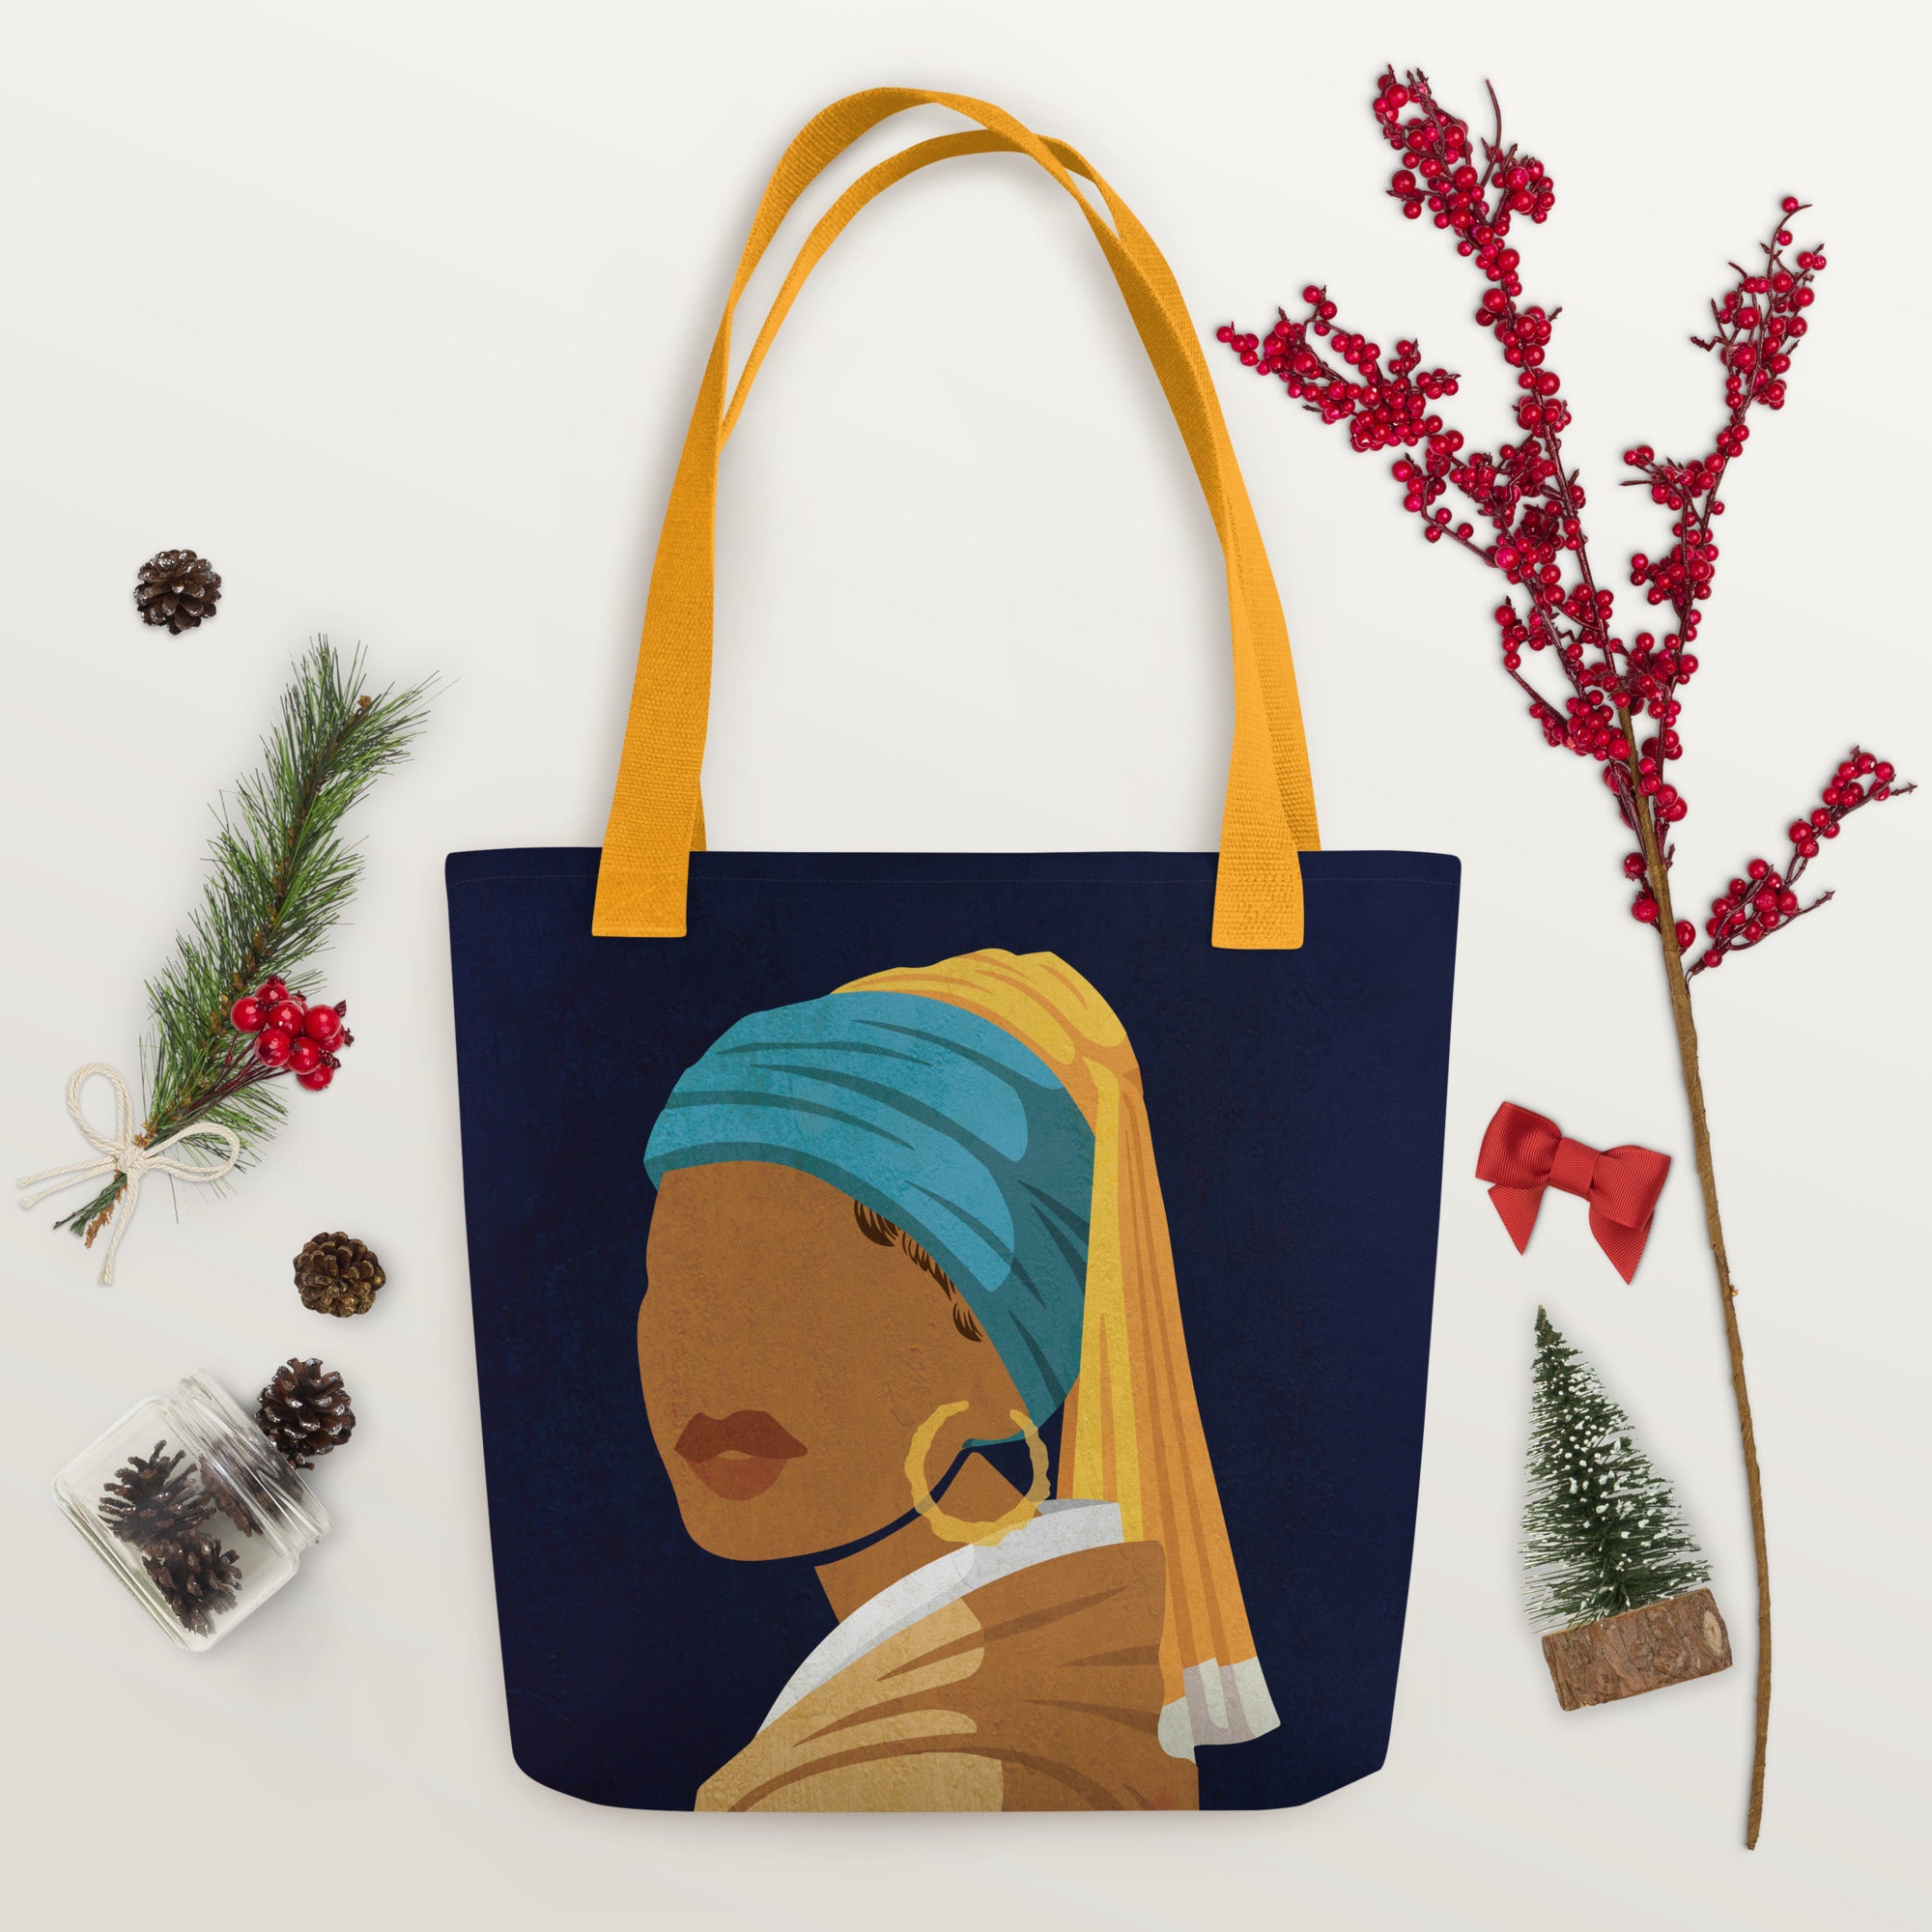 "Girl With The Bamboo Earring" Tote bag